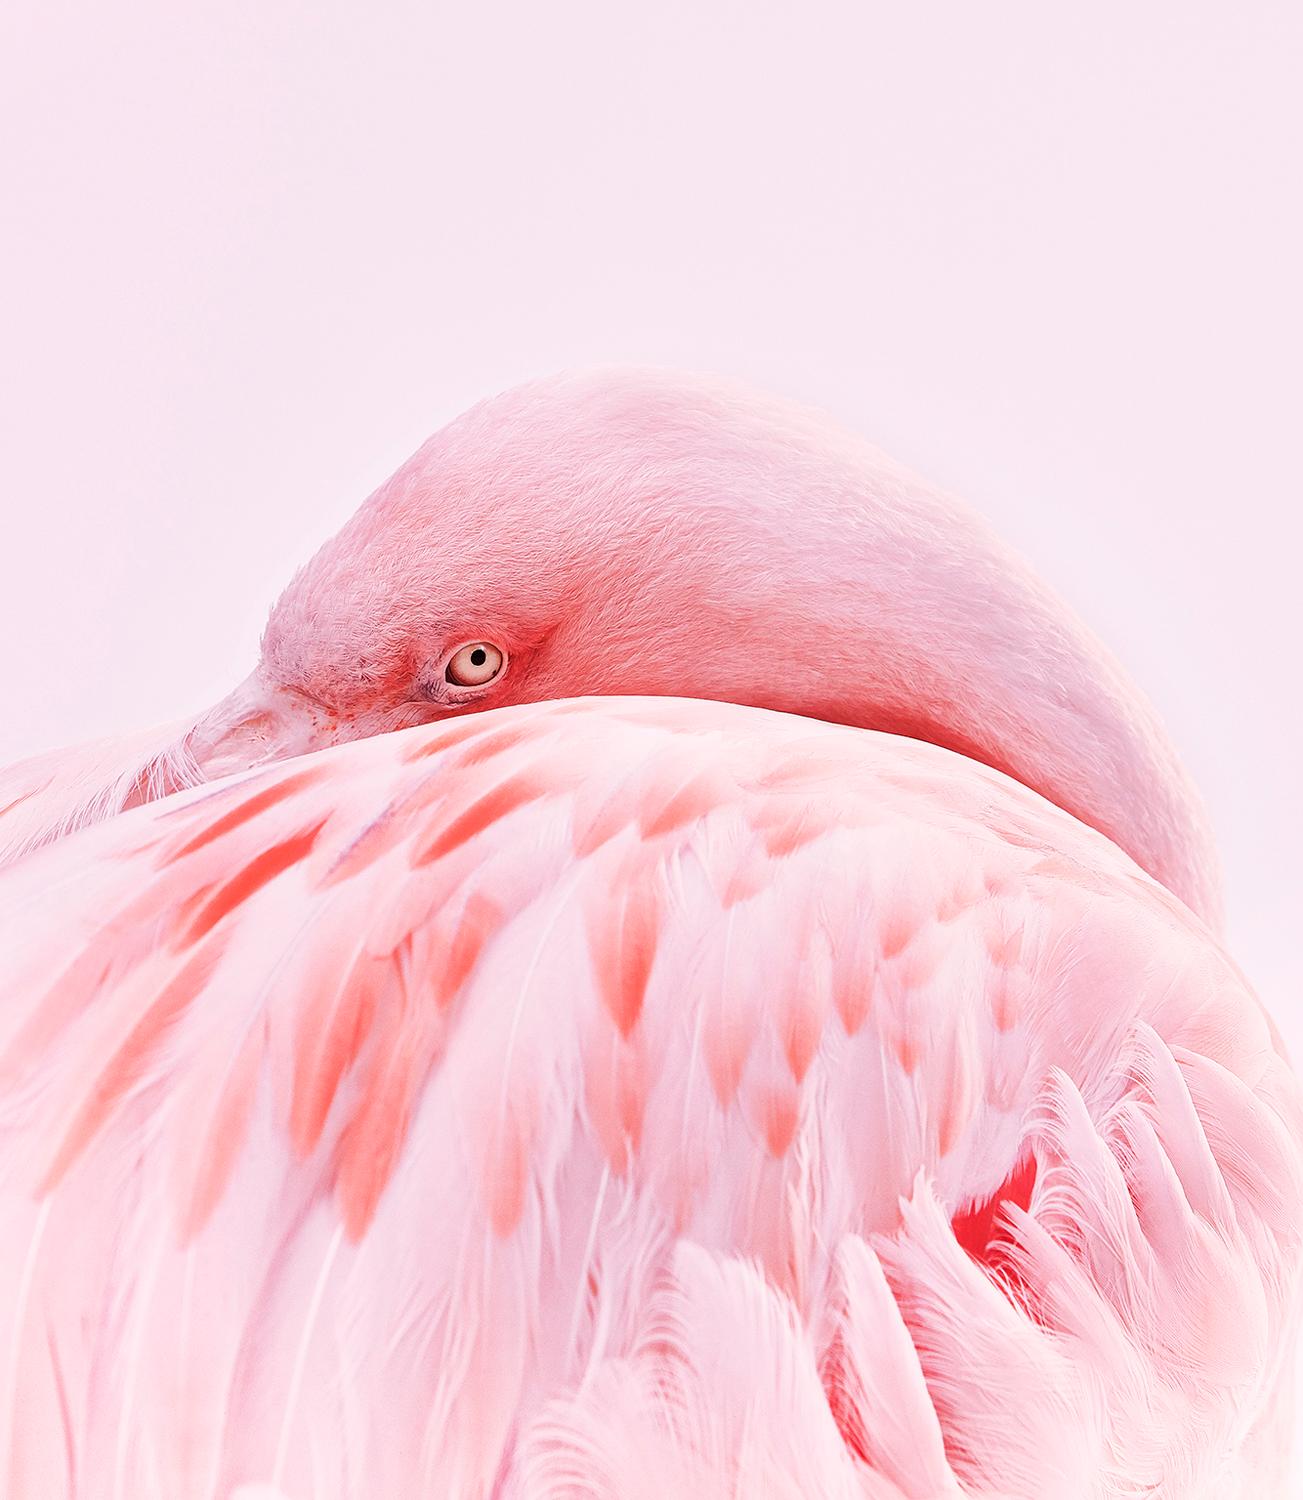 Flamingo No. 1, Canada, 2017. Edition of 3.
Chris Gordaneer is one of the most passionate photographers of our time. His photography is at the intersection of beauty and perfection.